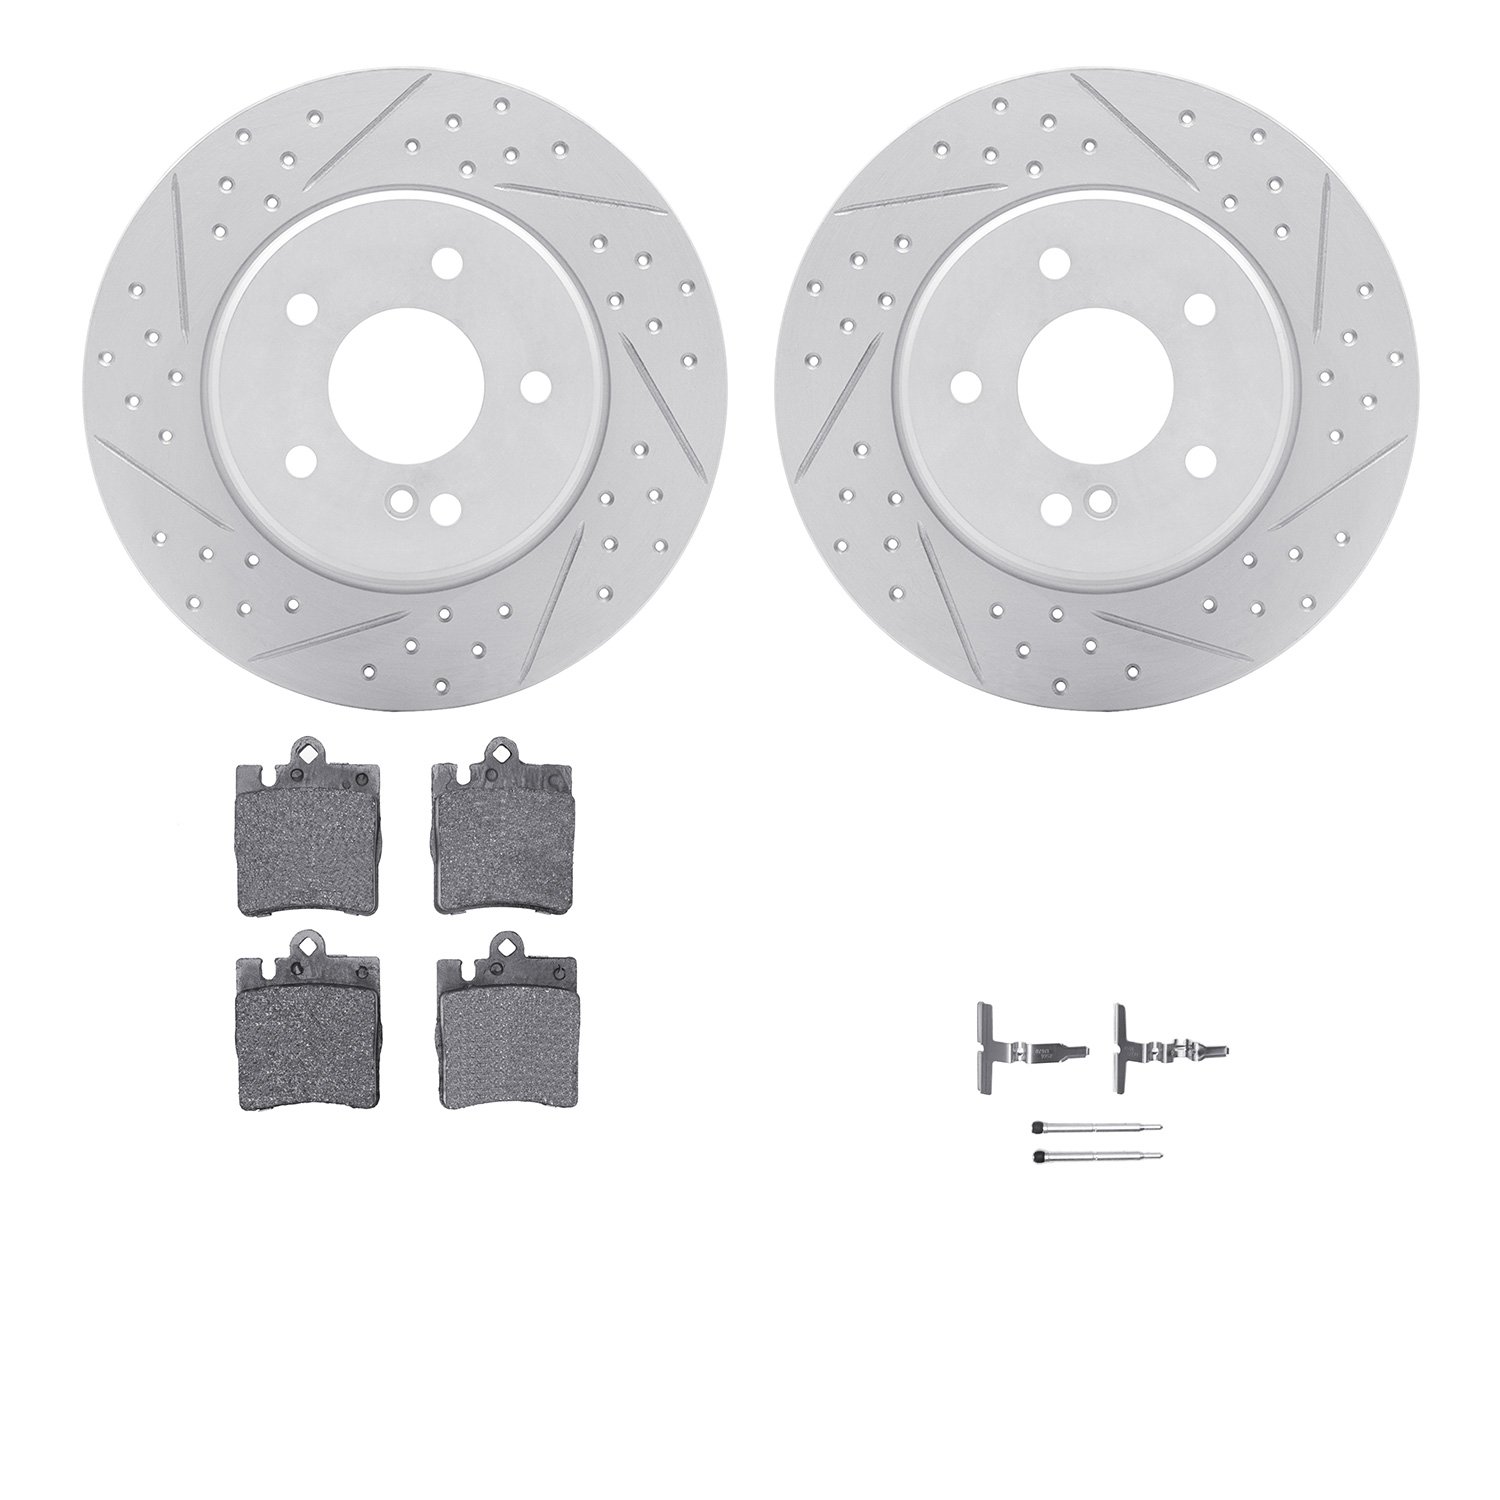 2512-63013 Geoperformance Drilled/Slotted Rotors w/5000 Advanced Brake Pads Kit & Hardware, 1996-2011 Mercedes-Benz, Position: R